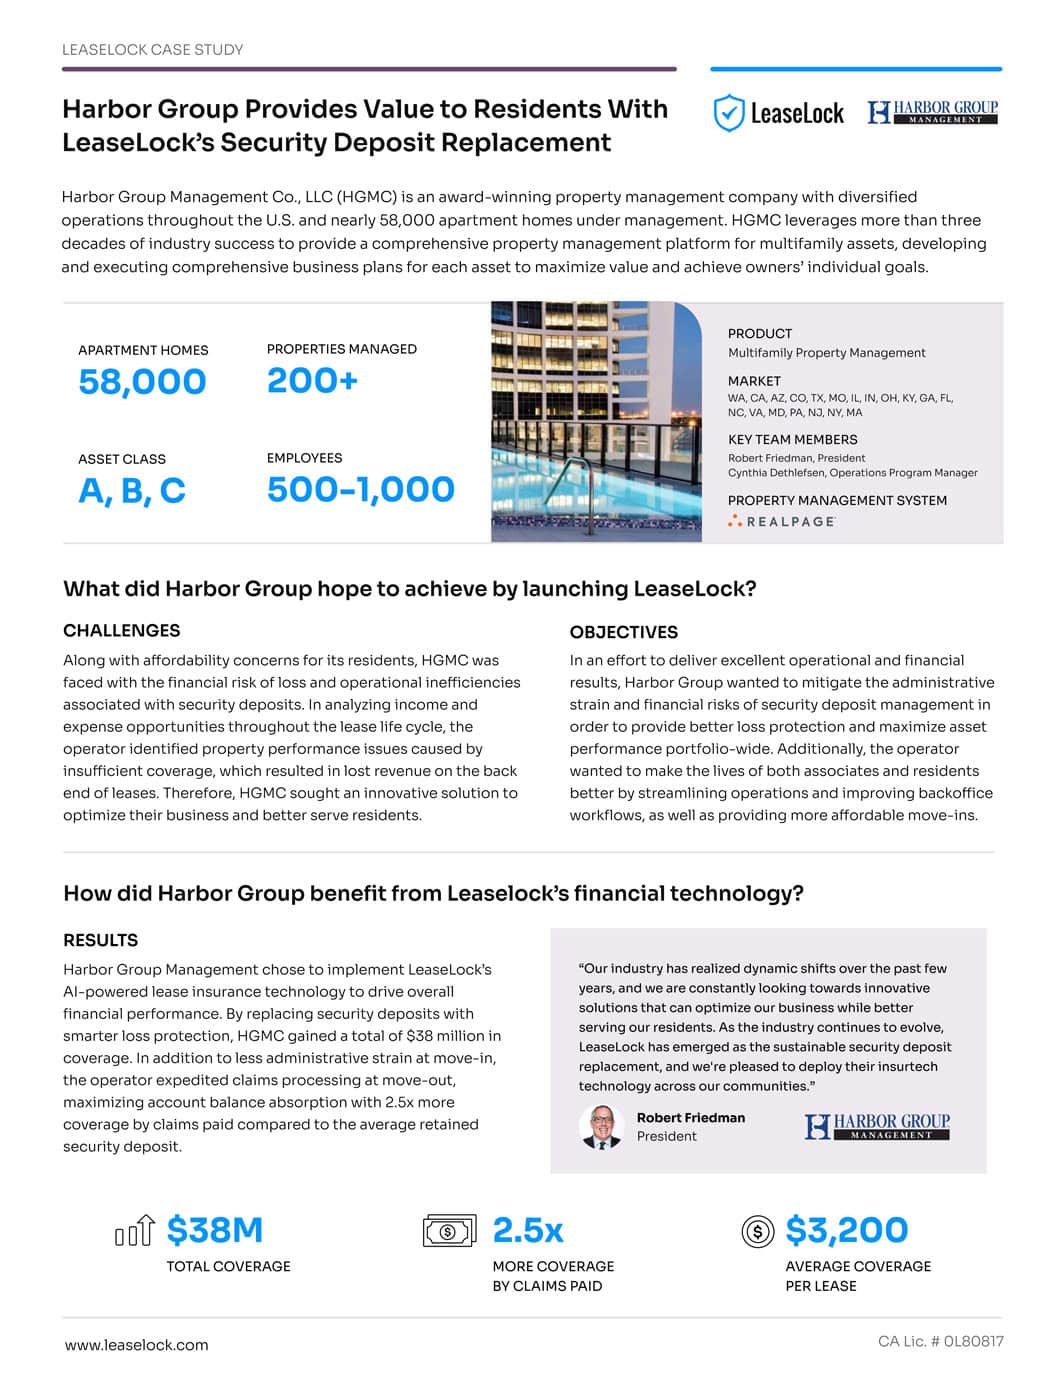 Harbor Group Management Co. Case Study - LeaseLock-(1)